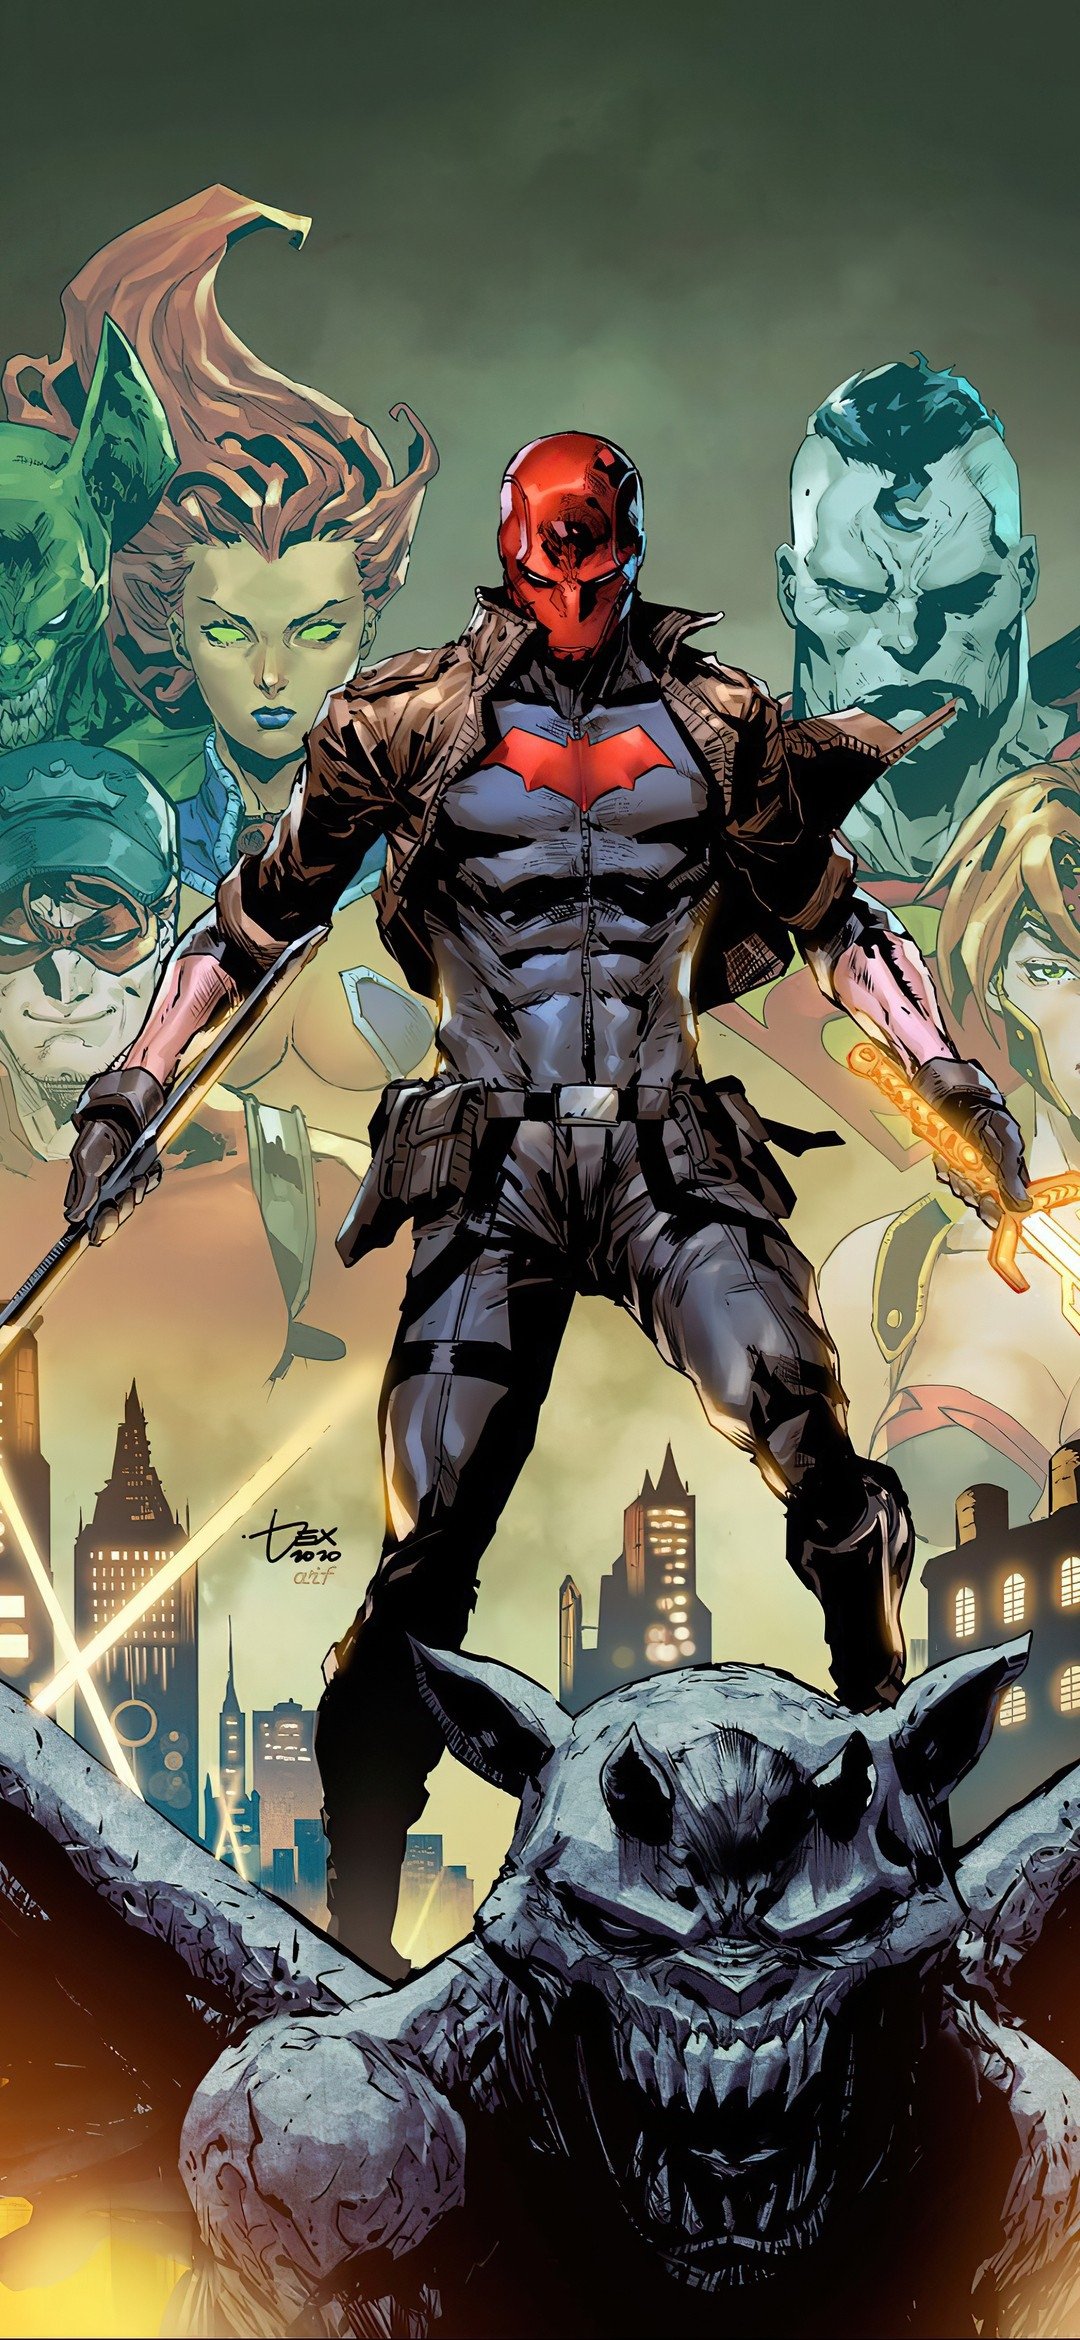 Red Hood Wallpaper, HD Red Hood Background, Free Image Download